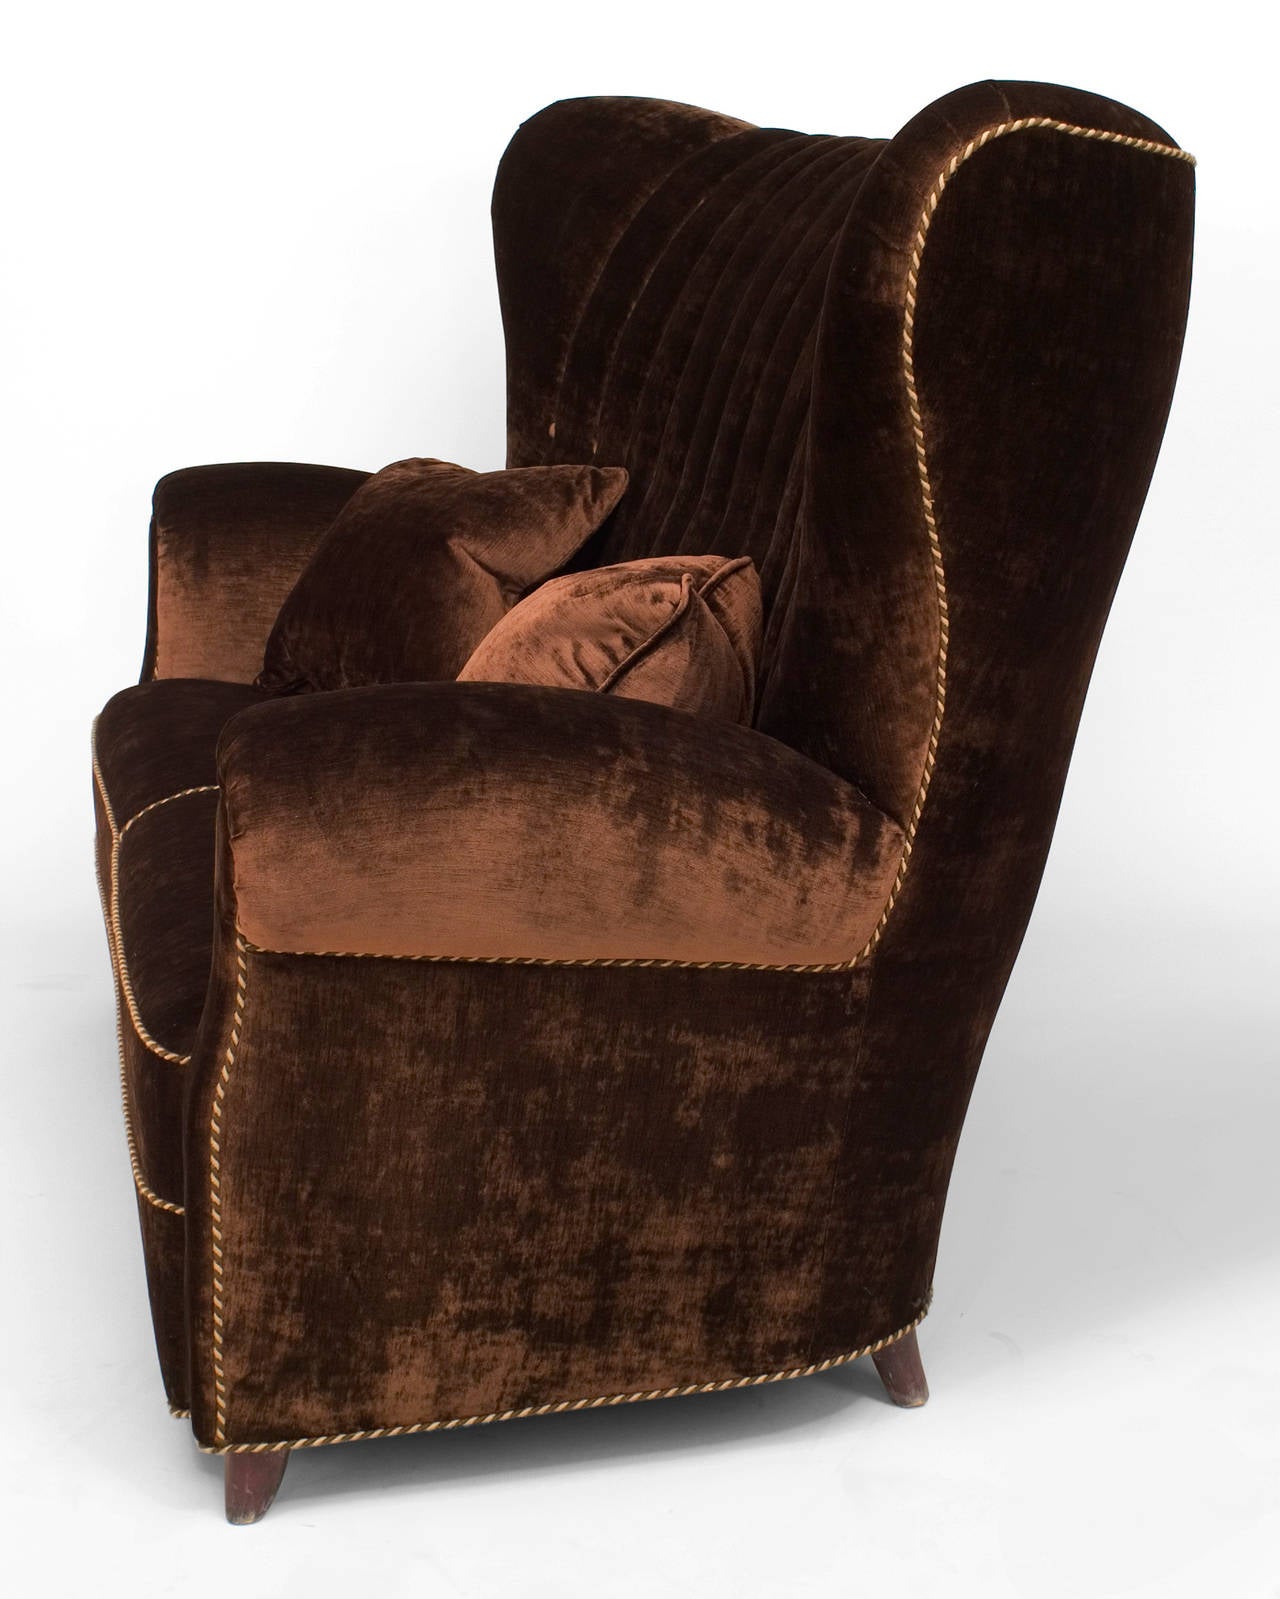 Italian 1940s wing back loveseat with brown velvet upholstery and ribbon twist cord resting on short beechwood legs (style of GIORGIO RAMPONI) (ref: fig. 72, Roberto Aloi 